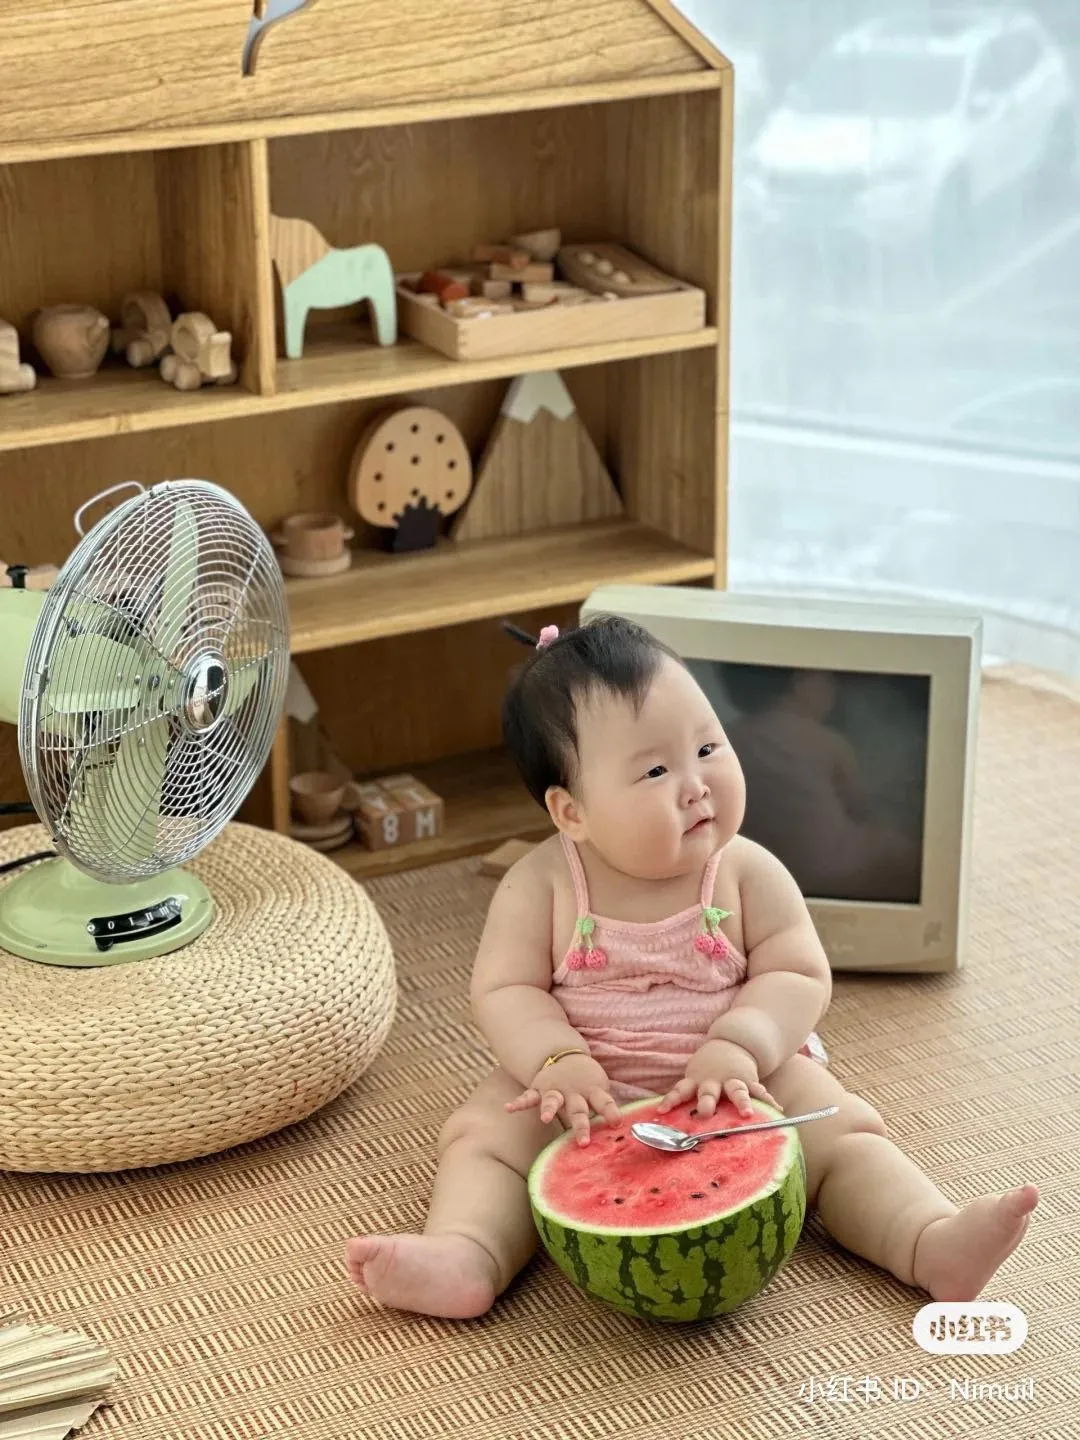 4 A Baby Eating Watermelon Makes Netizens Delighted